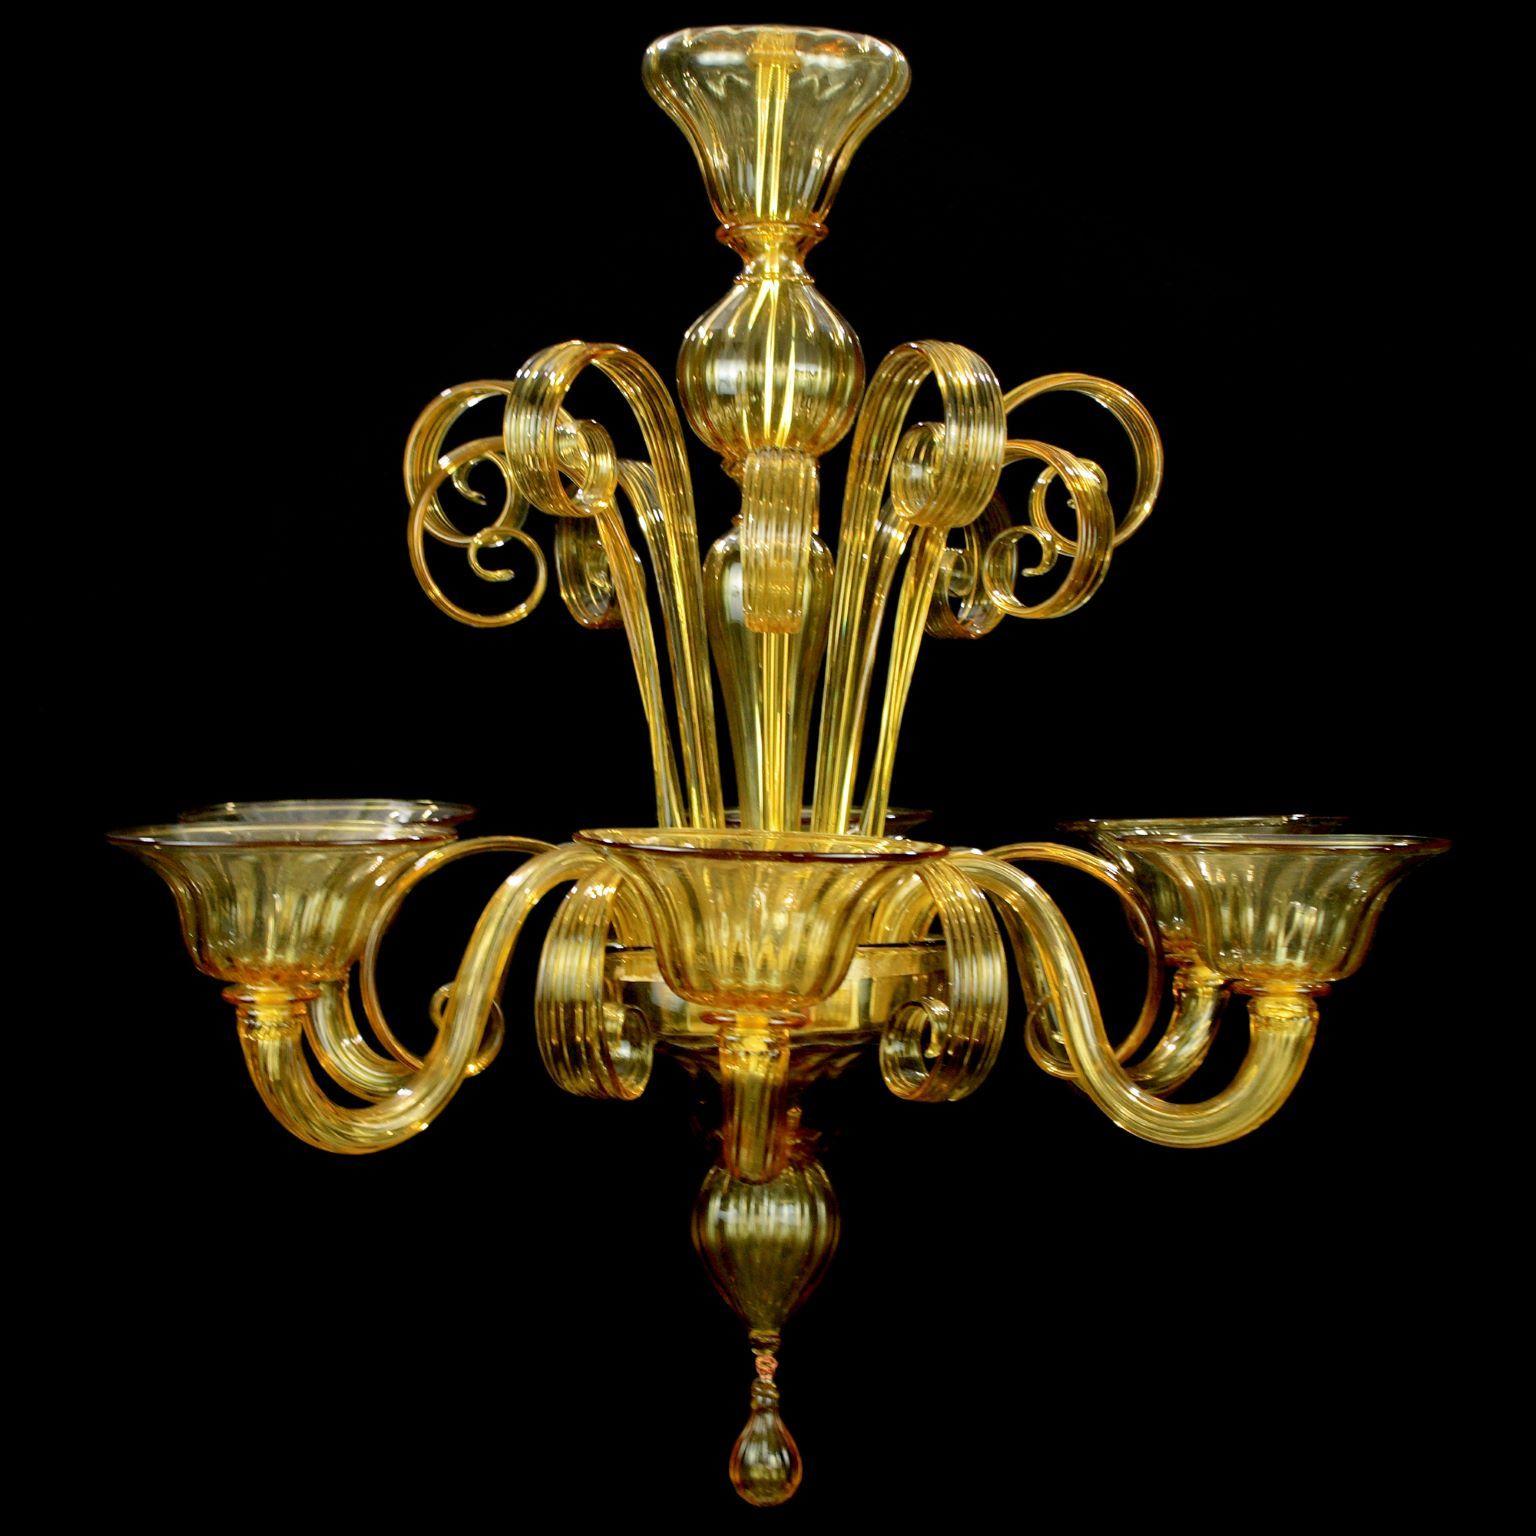 Capriccio by Multiforme is a 6 lights chandelier, in acacia artistic glass, with curly ornamental elements.
Inspired by the Classic Venetian tradition it is characterized by a central column where many blown glass “pastoral” elements are installed.